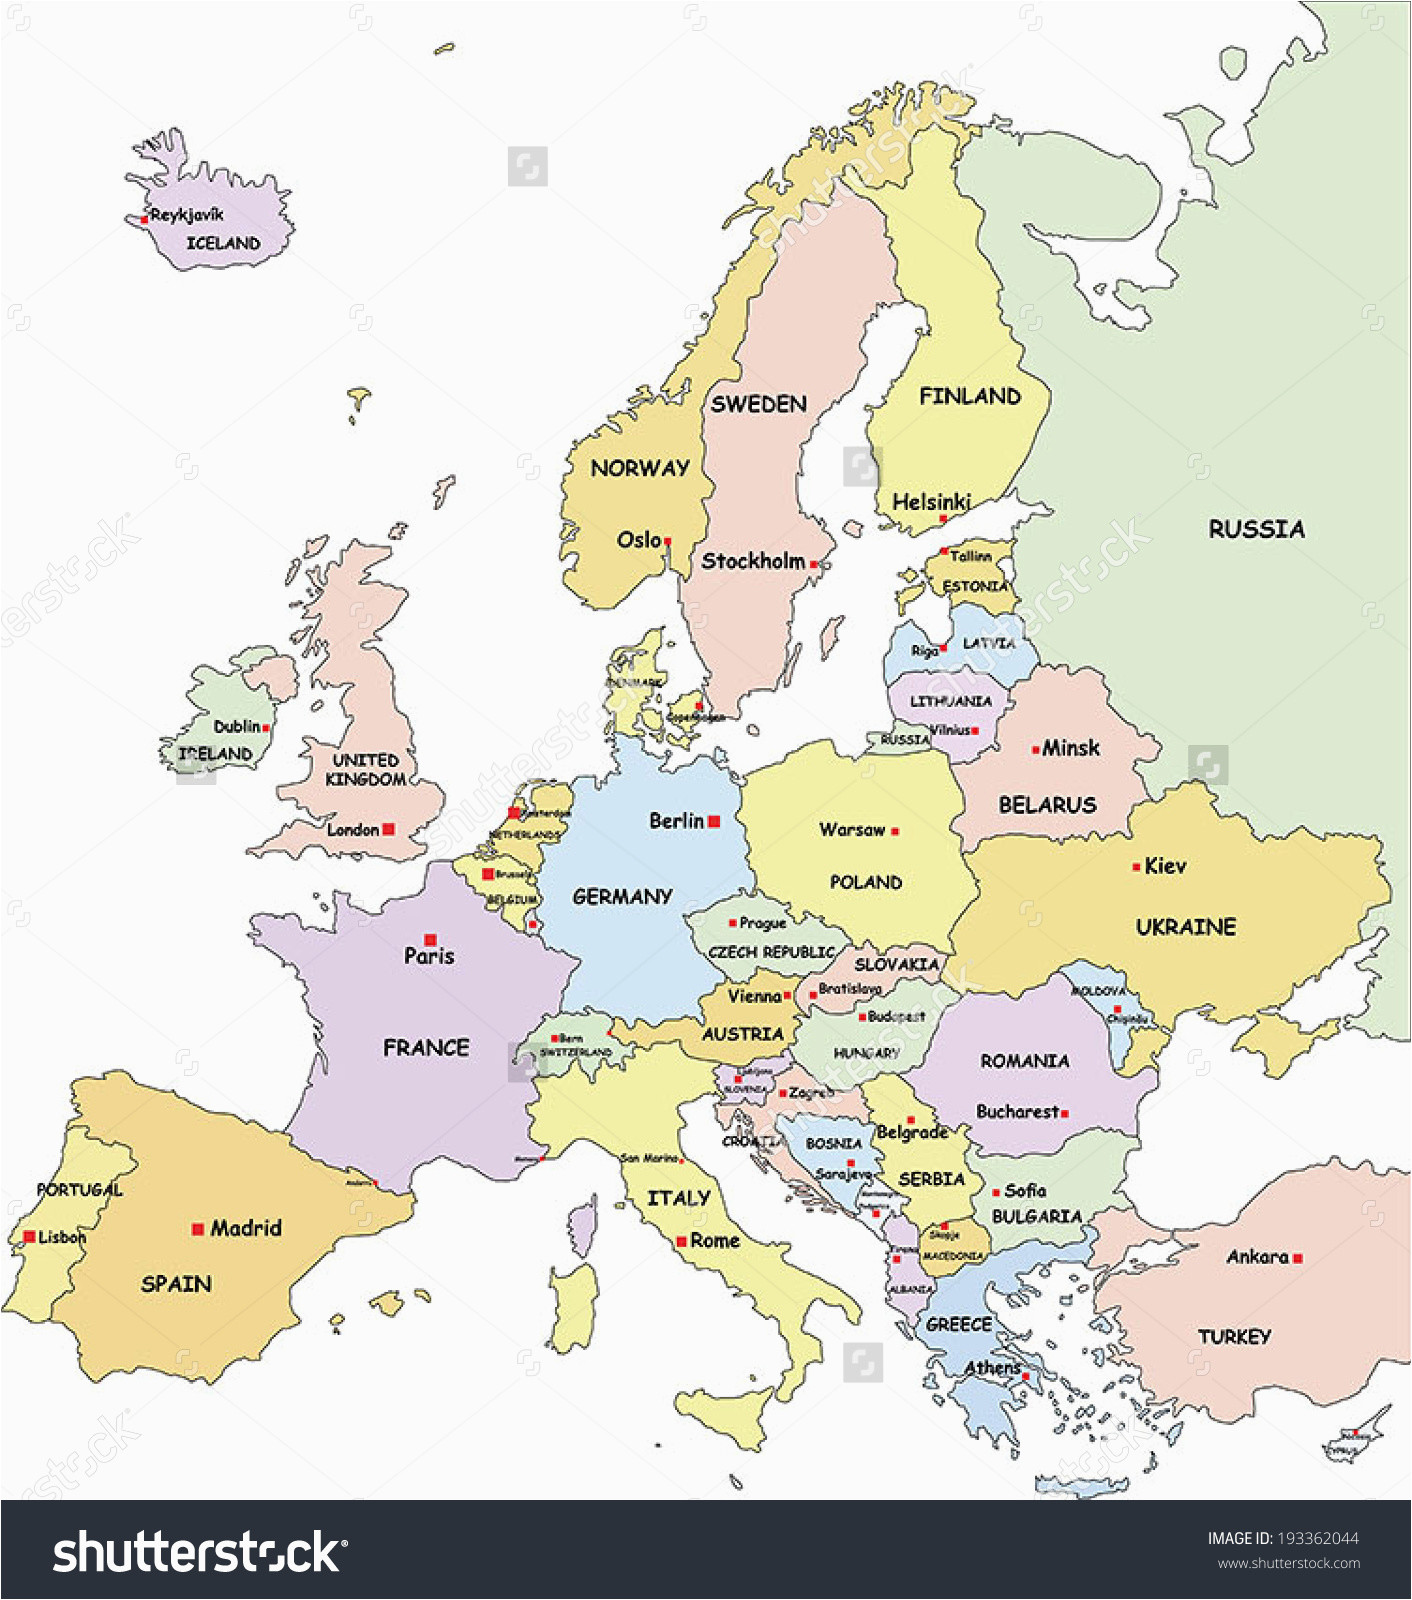 Northern Europe Map With Cities - United States Map